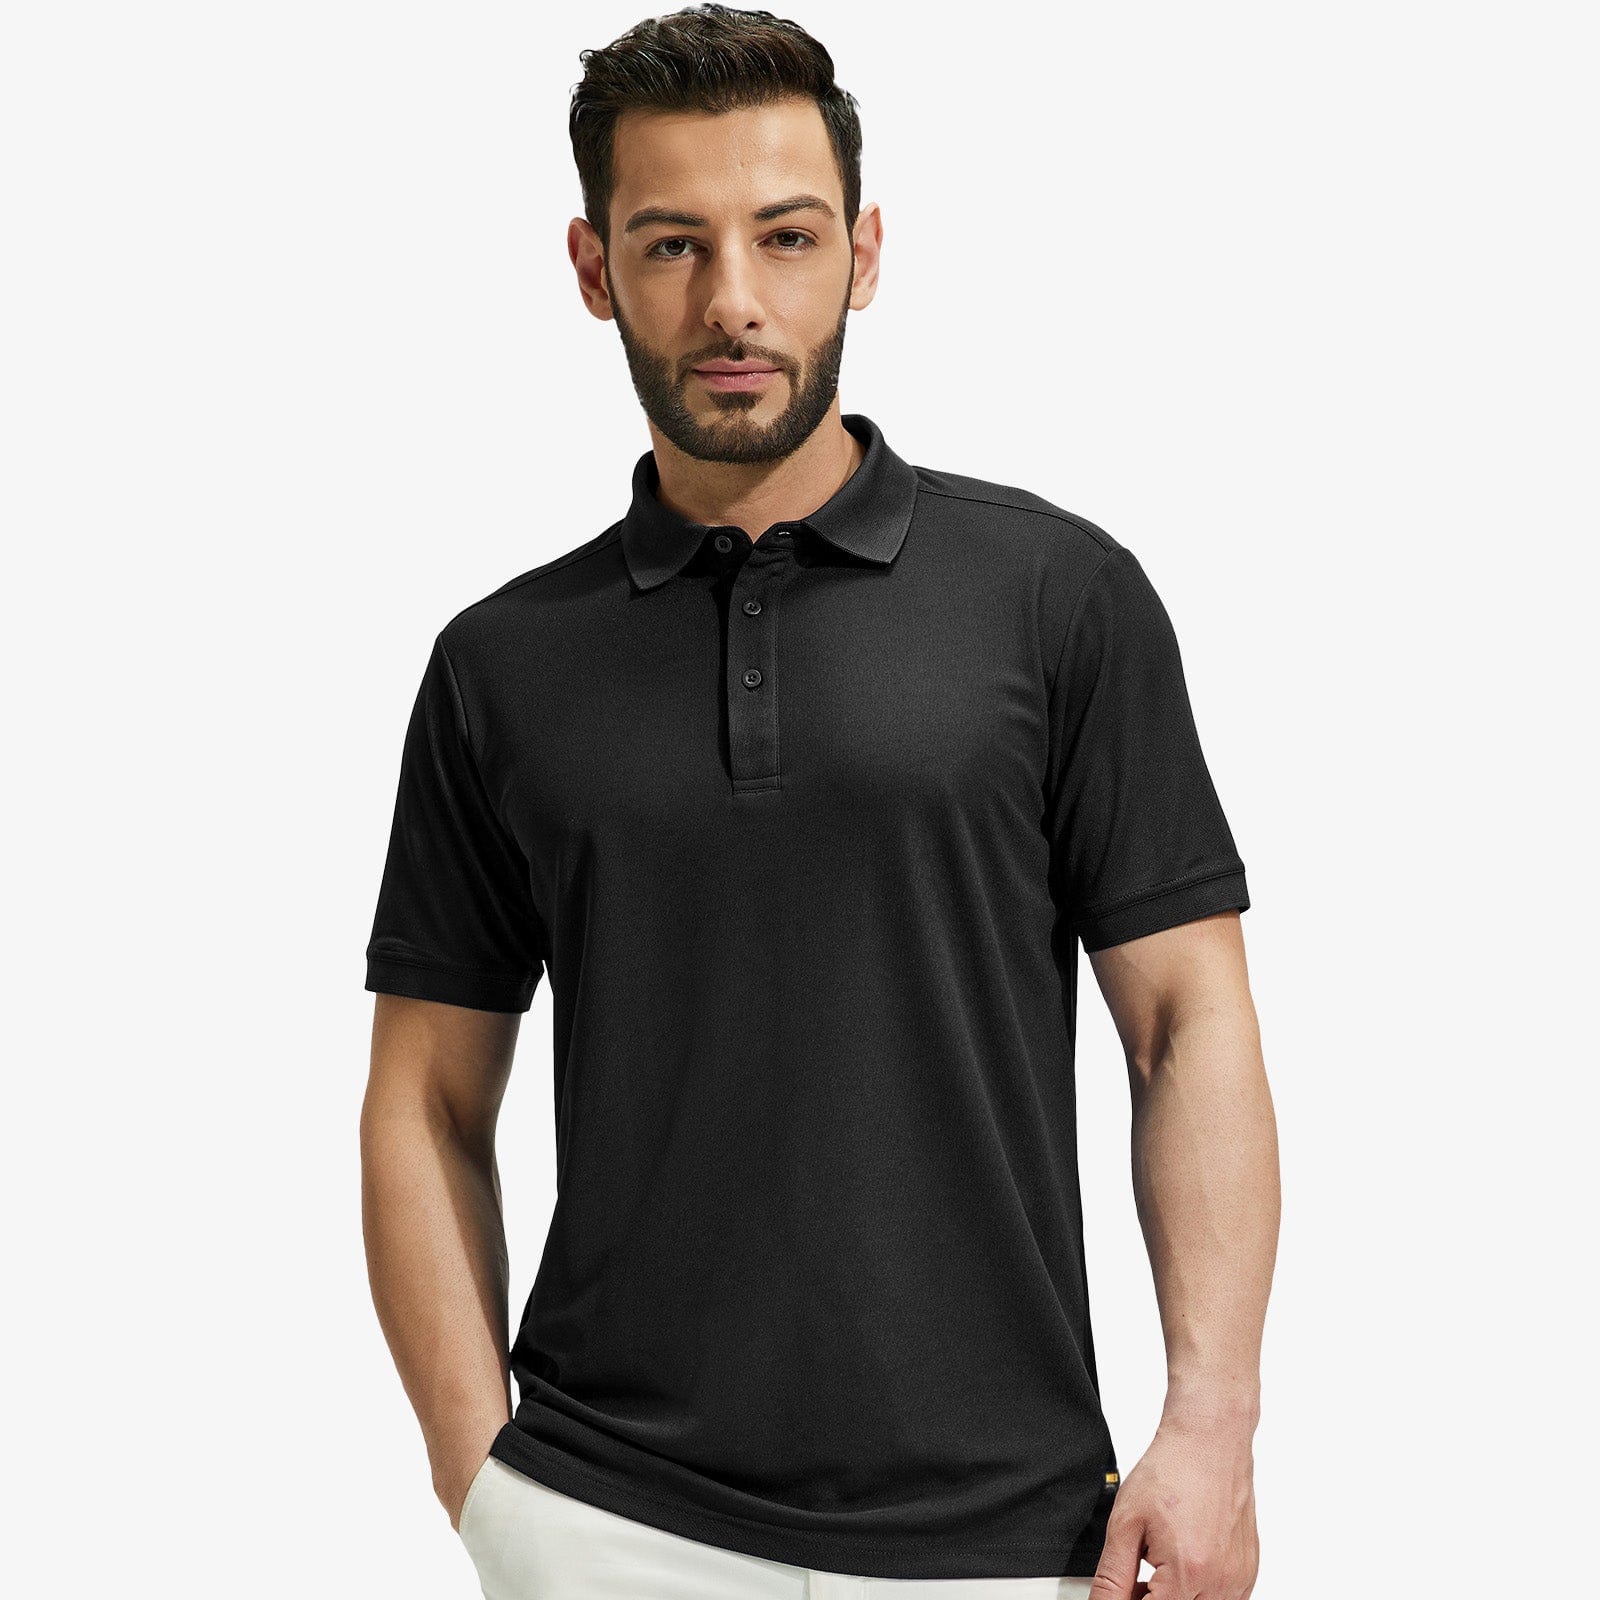 Men Golf Polo Shirts Regular-fit Fashion Casual Collared T-Shirts Men Polo Black / S MIER